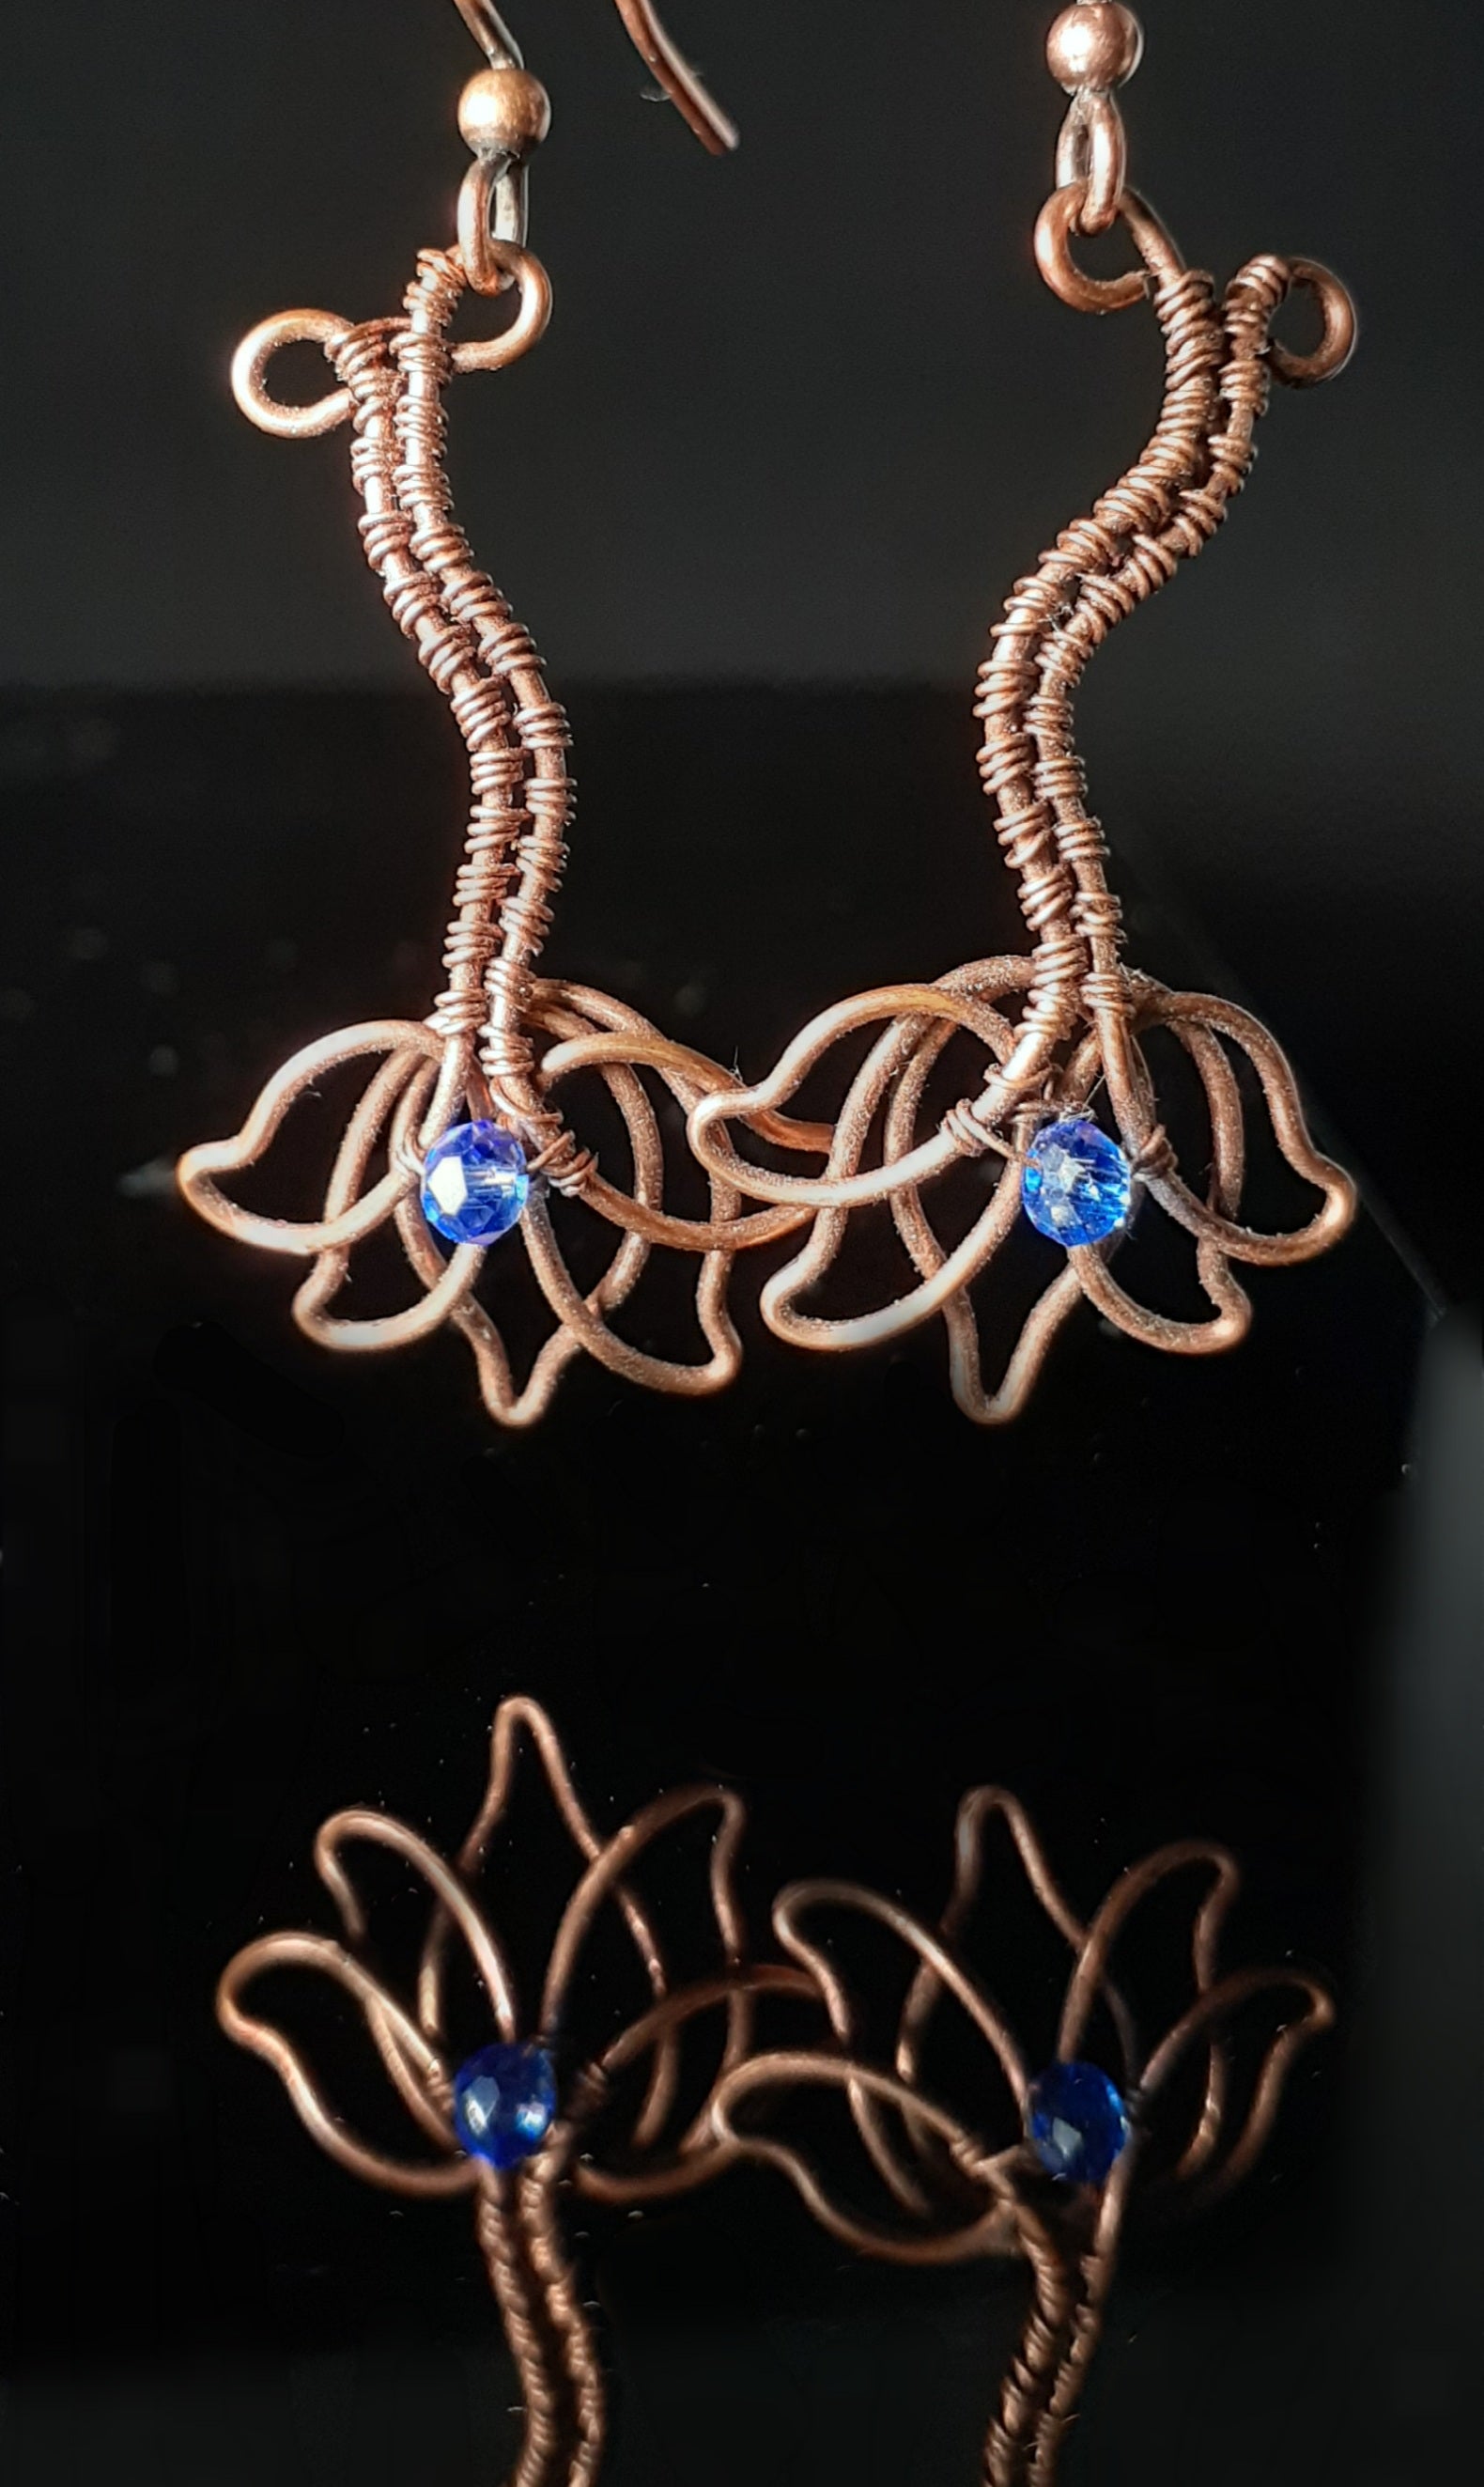 copper wire shaped like a Lotus Flower with a blue Swarovski crystal. hypoallergenic ear wires